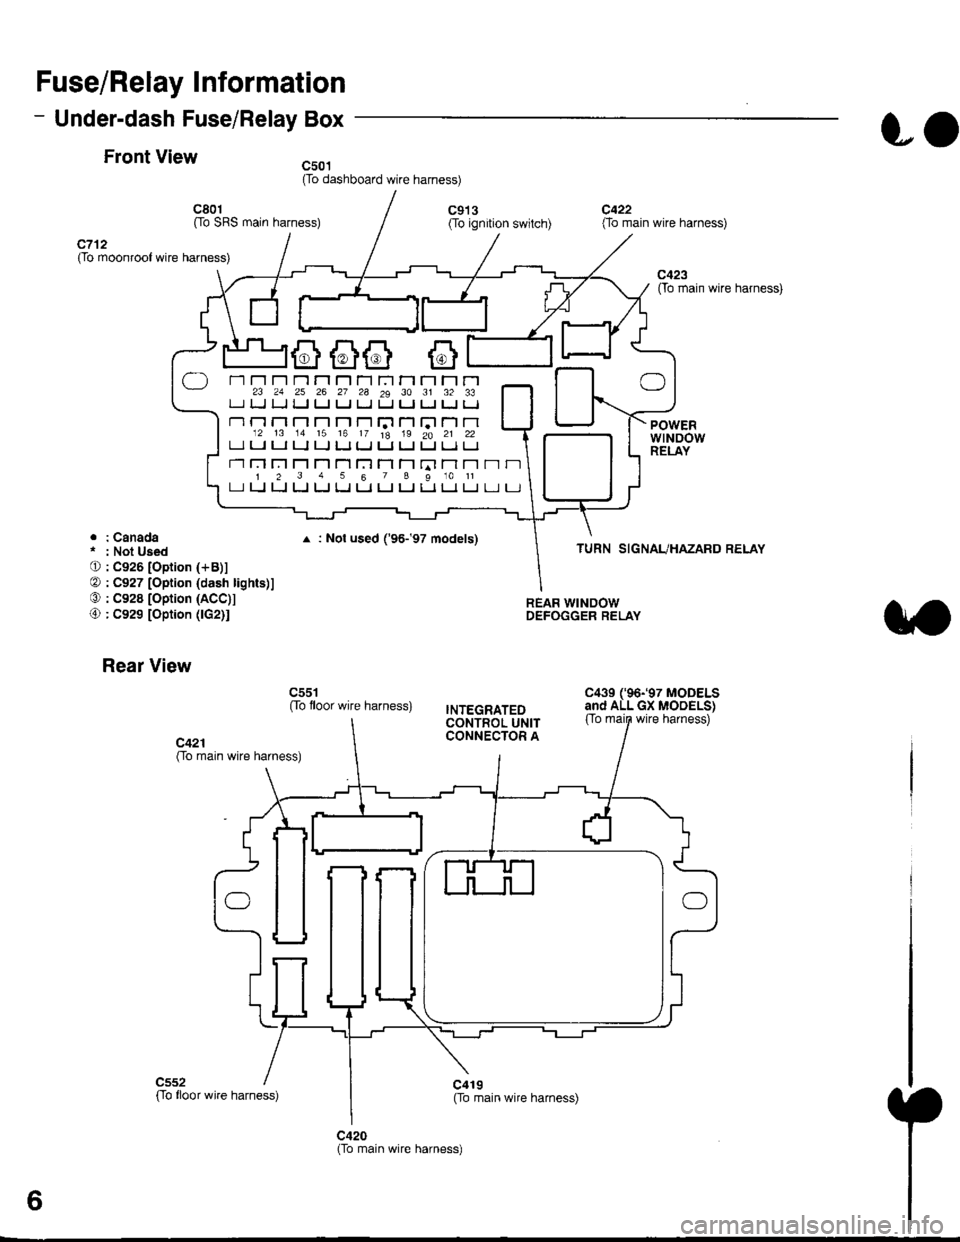 HONDA CIVIC 1996 6.G Workshop Manual Fuse/Relay Information
- Under-dash Fuse/Relay Box
Front View
c712(To moonroof wire harness)
. : Canadai : Not UsedO : C926 loprion (+B)l
@ : C927 loption (dash lights)]
O : C928 [Option (ACC]I
@ : C9